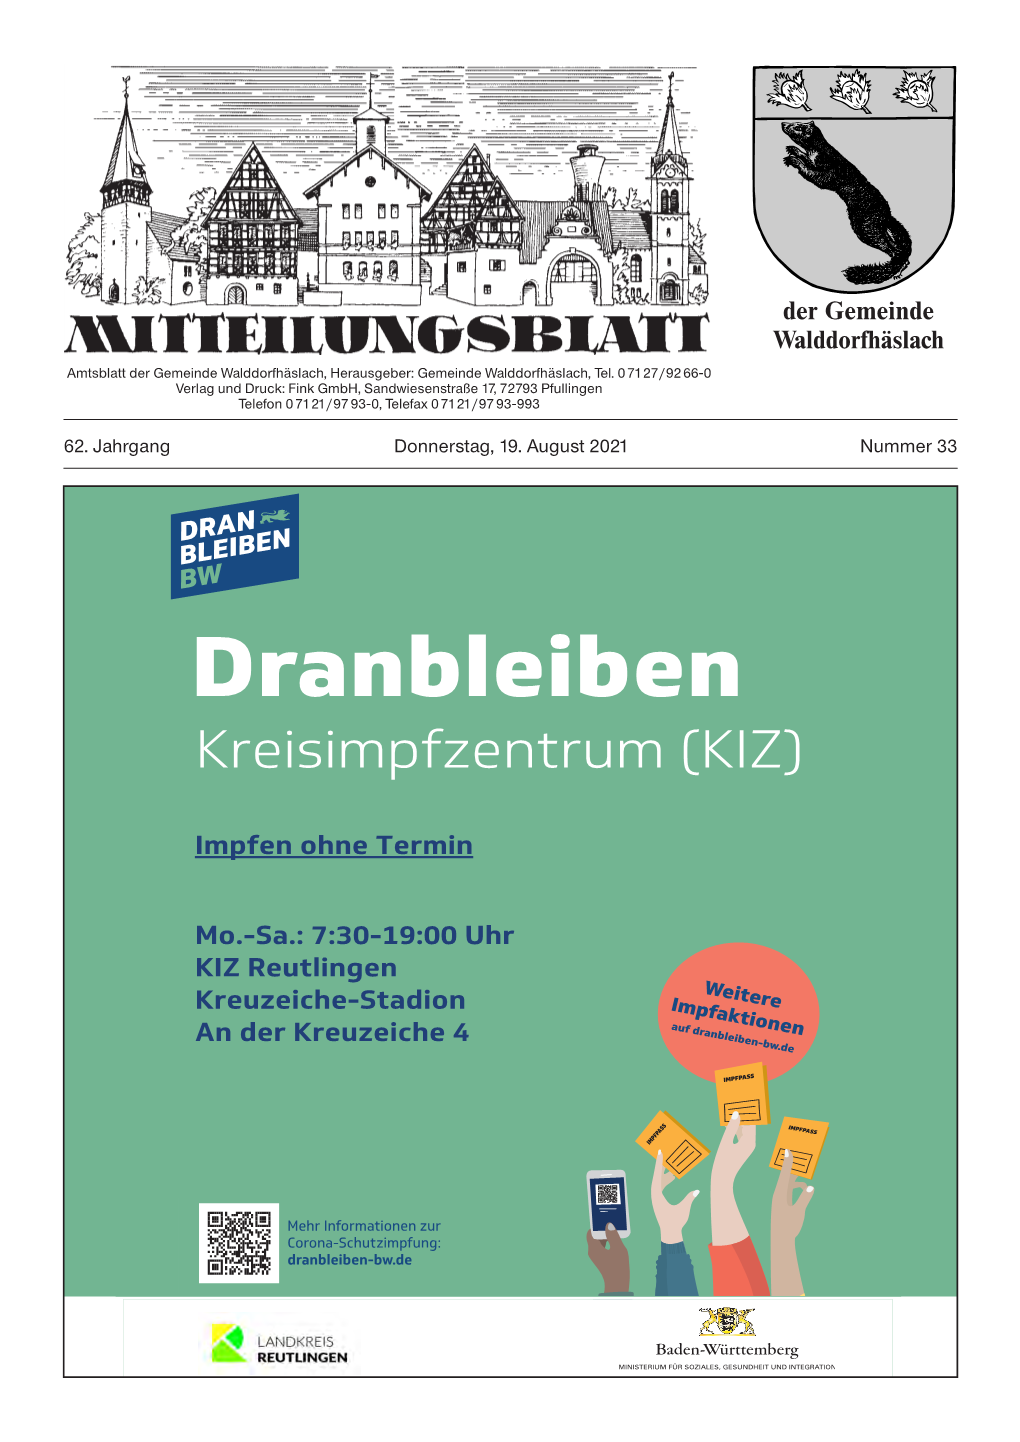 Donnerstag, 19.08.2021